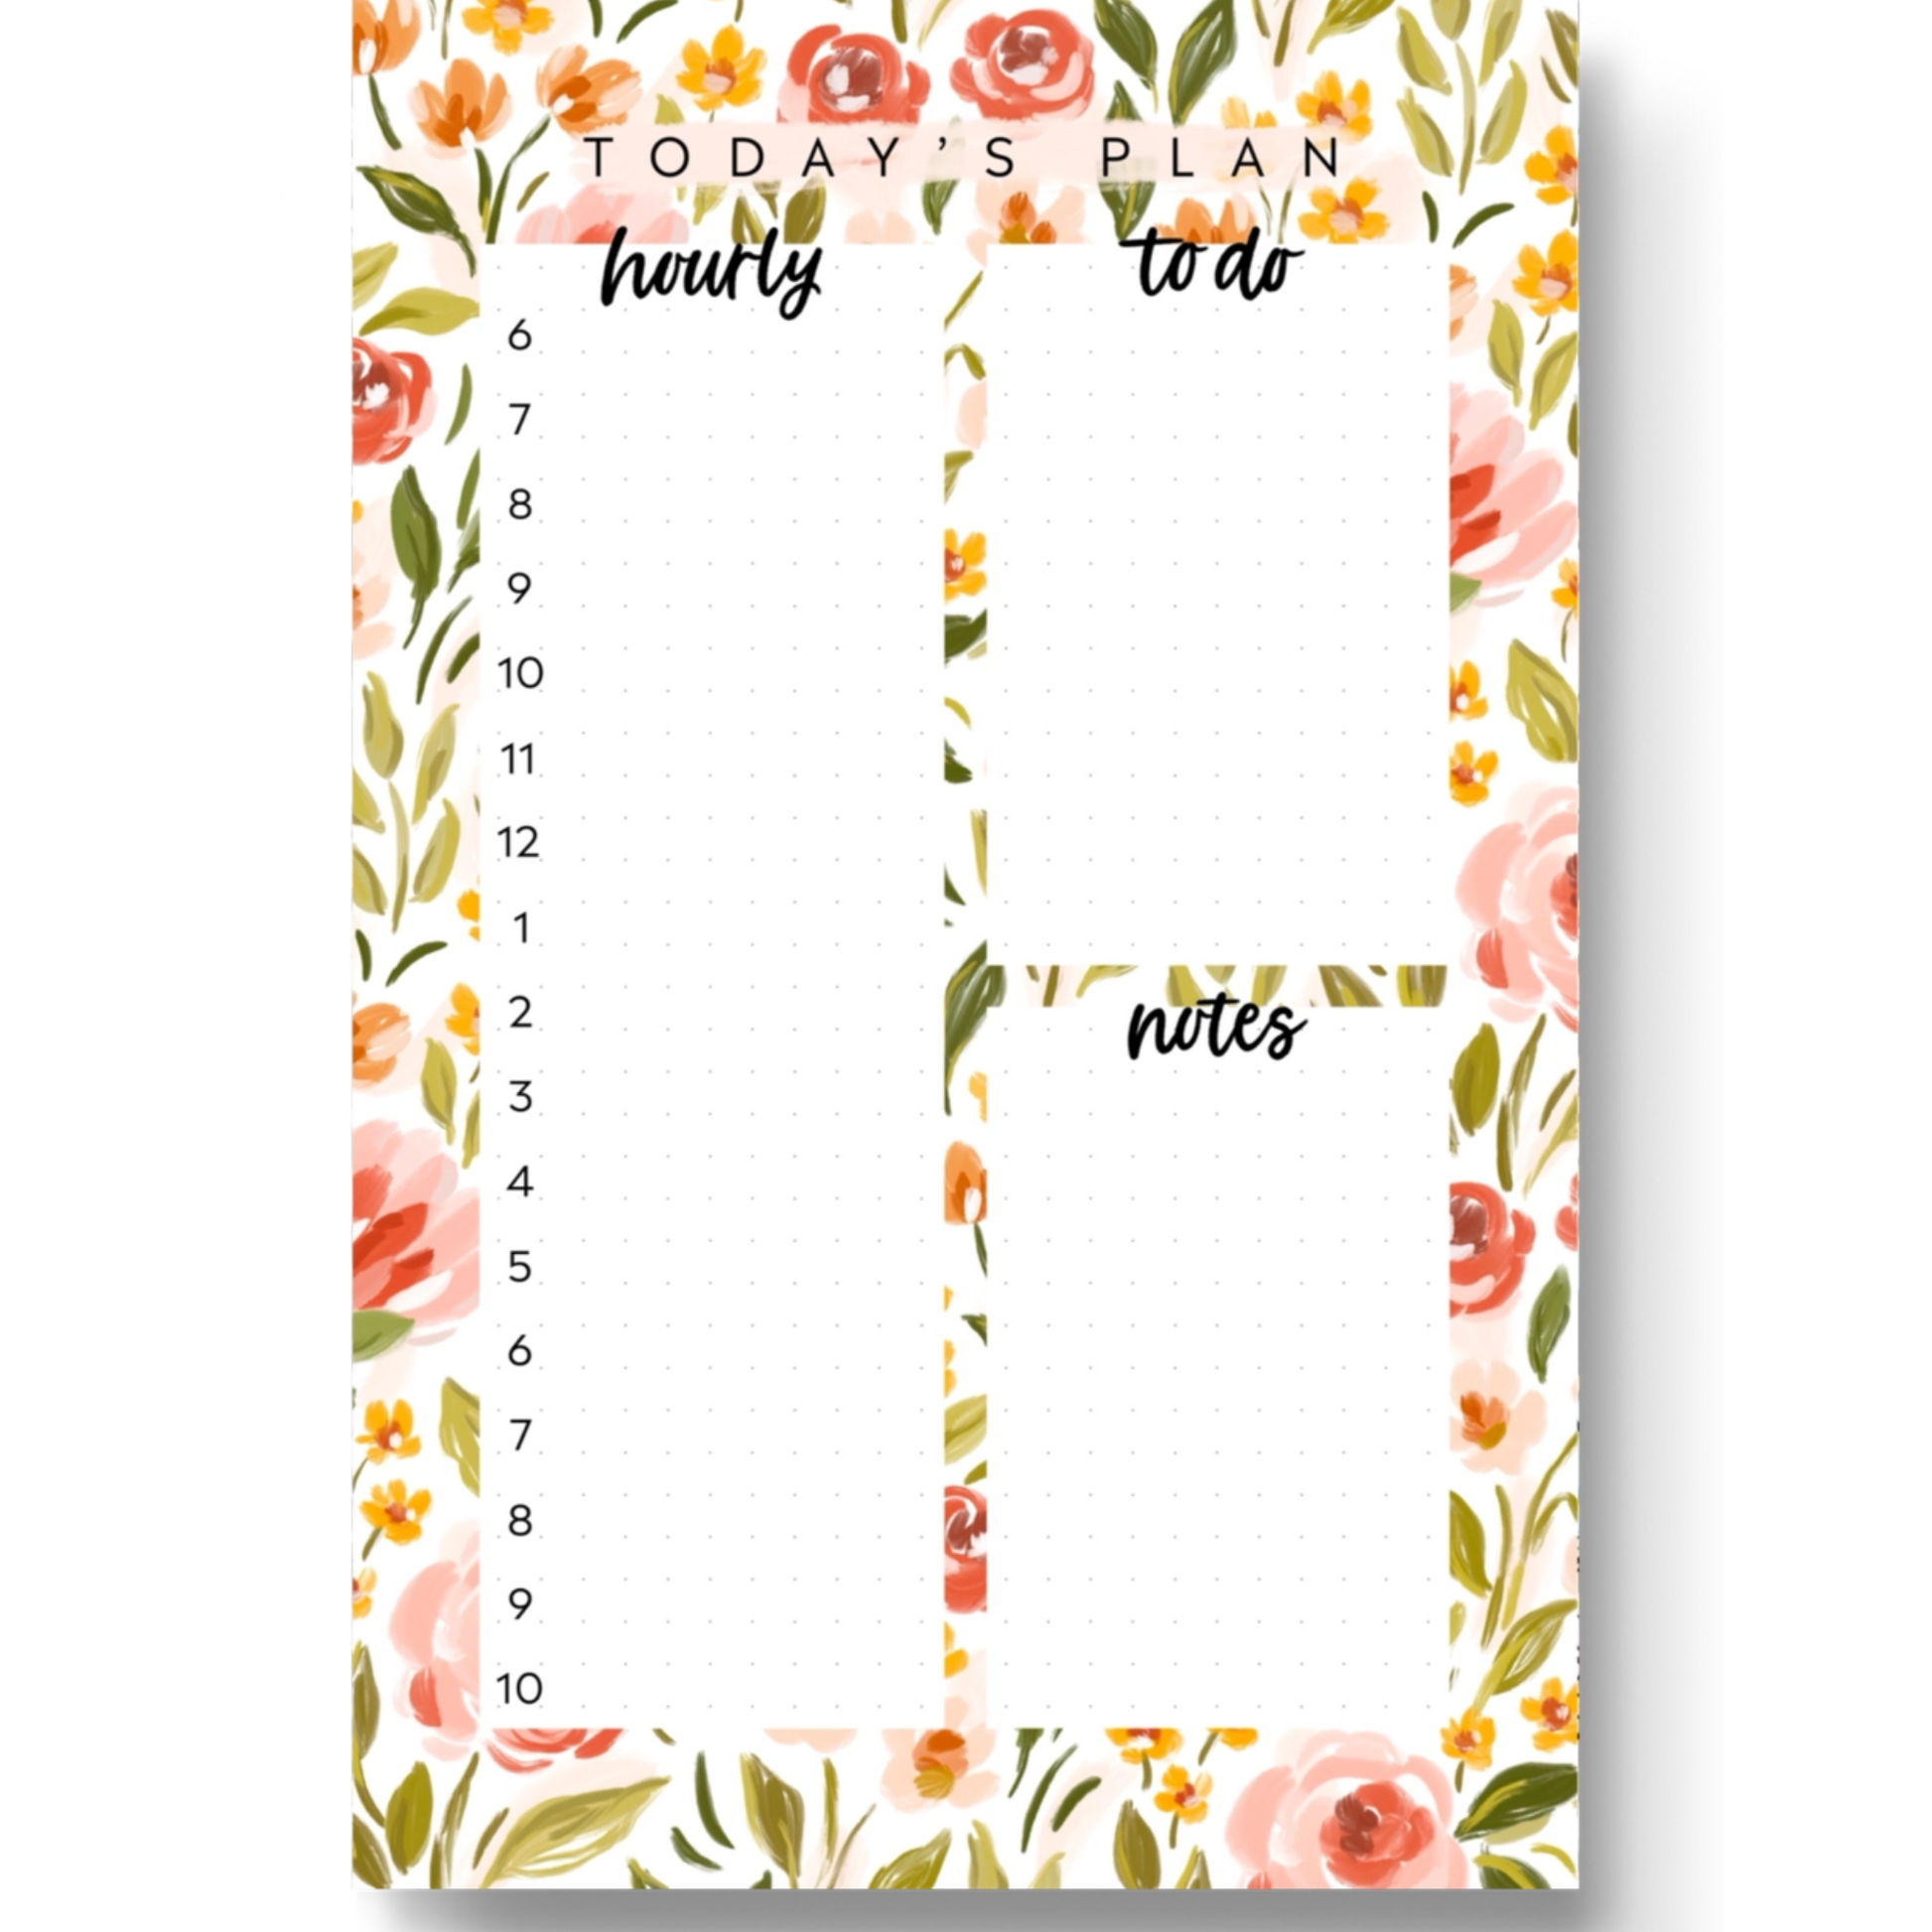 An adorable daily planner note pad featuring cute illustrations